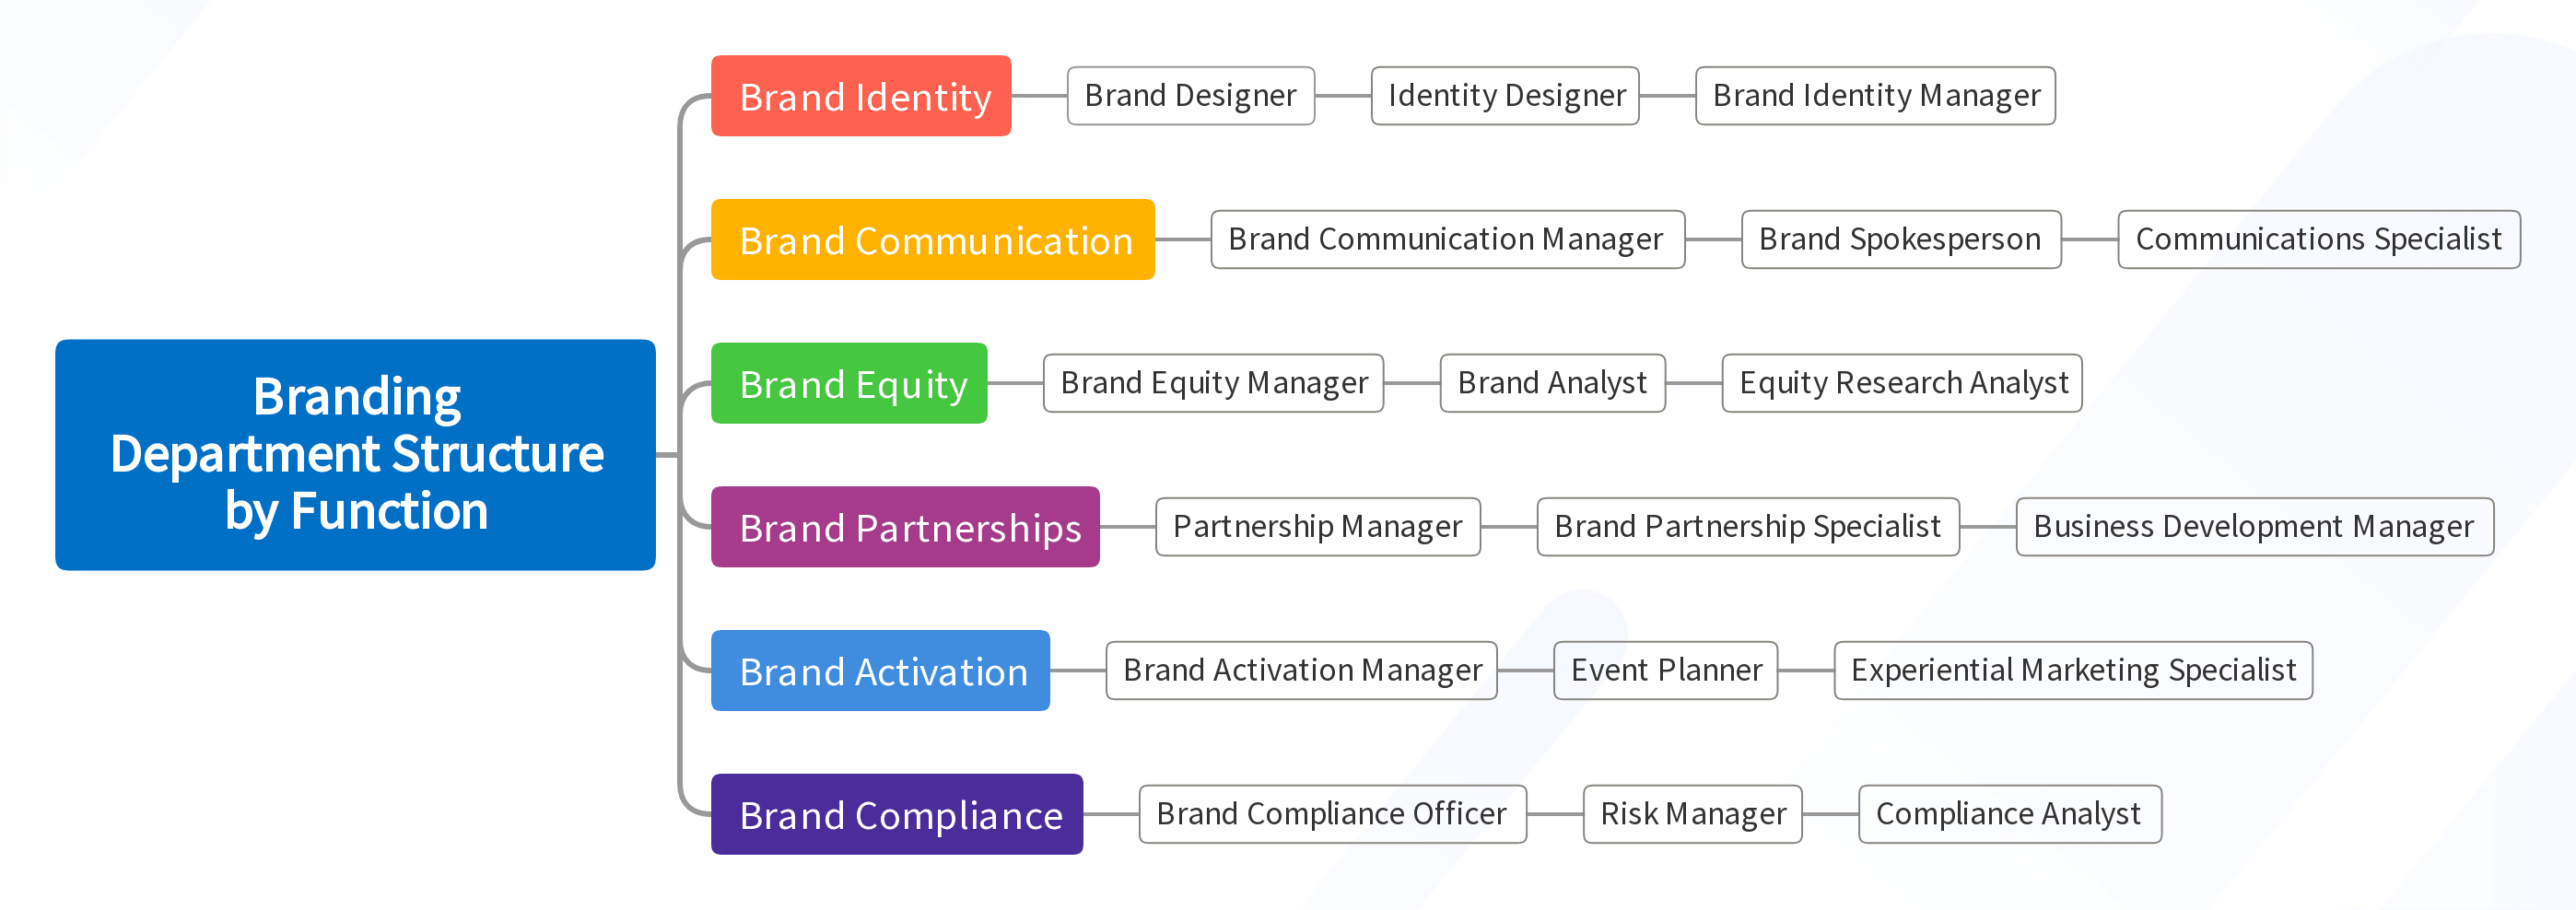 Branding Department Structure by Function